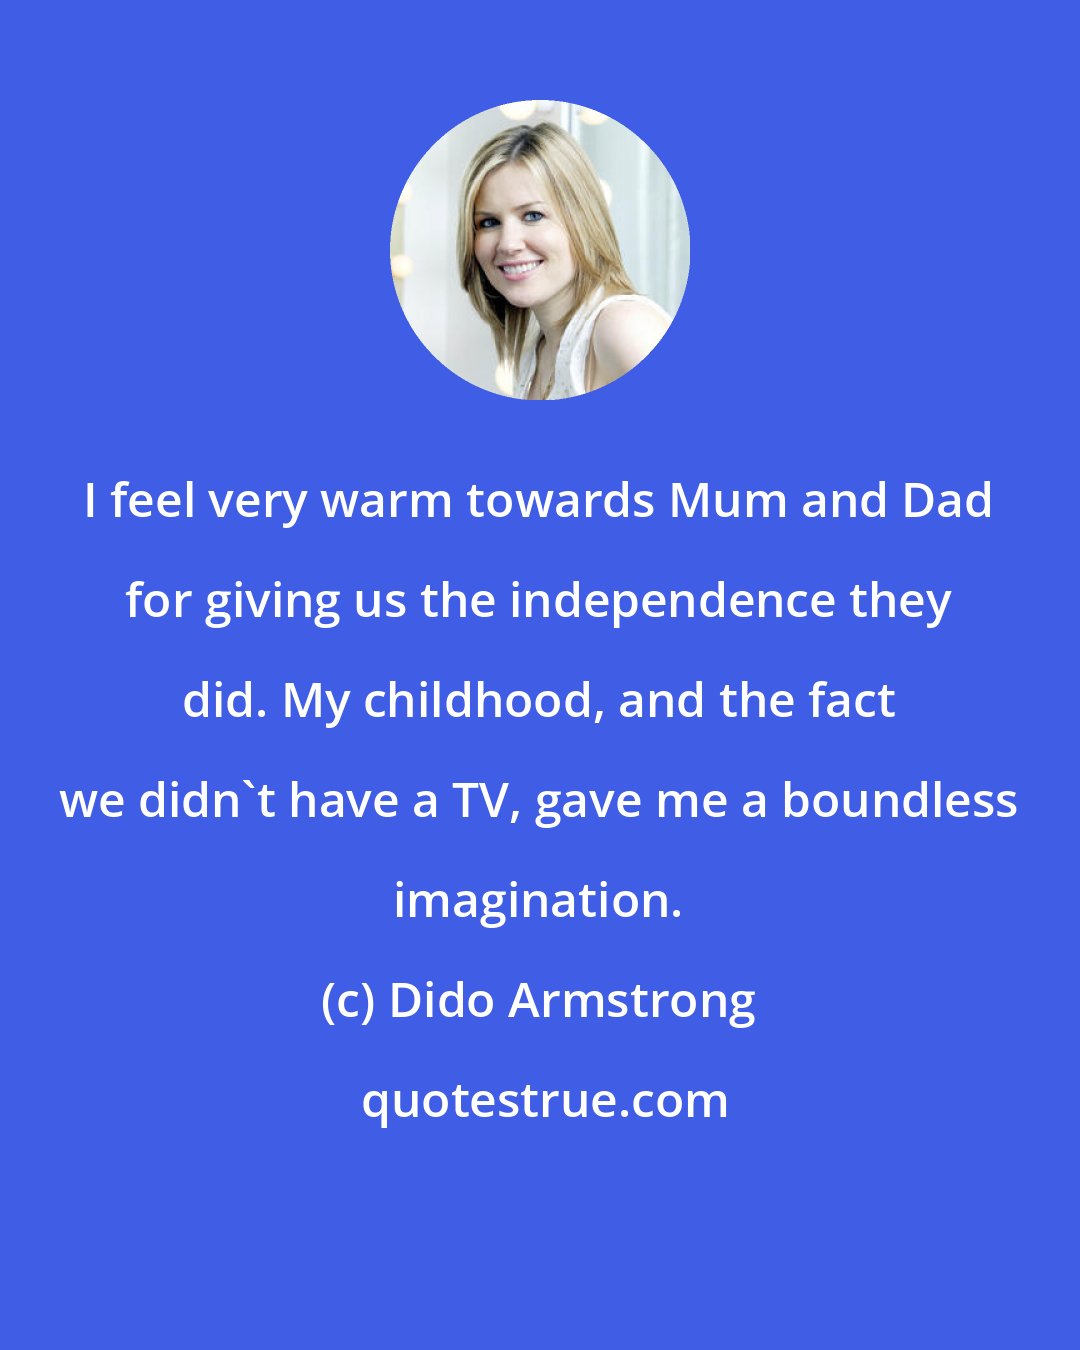 Dido Armstrong: I feel very warm towards Mum and Dad for giving us the independence they did. My childhood, and the fact we didn't have a TV, gave me a boundless imagination.